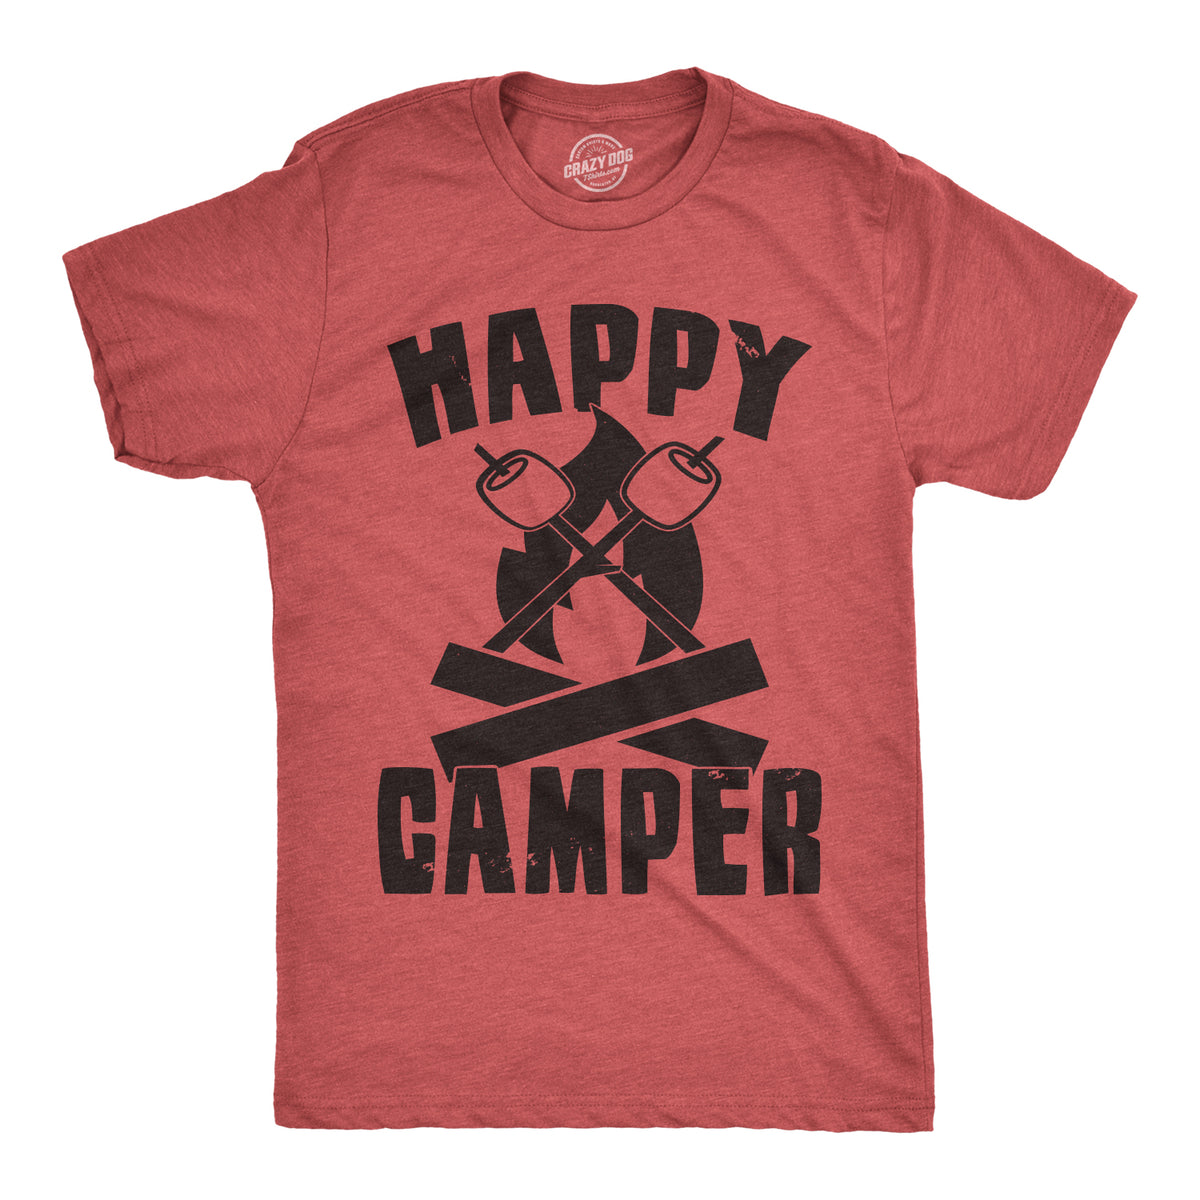 Funny Heather Red - Happy Camper Happy Camper Mens T Shirt Nerdy Camping Retro Tee